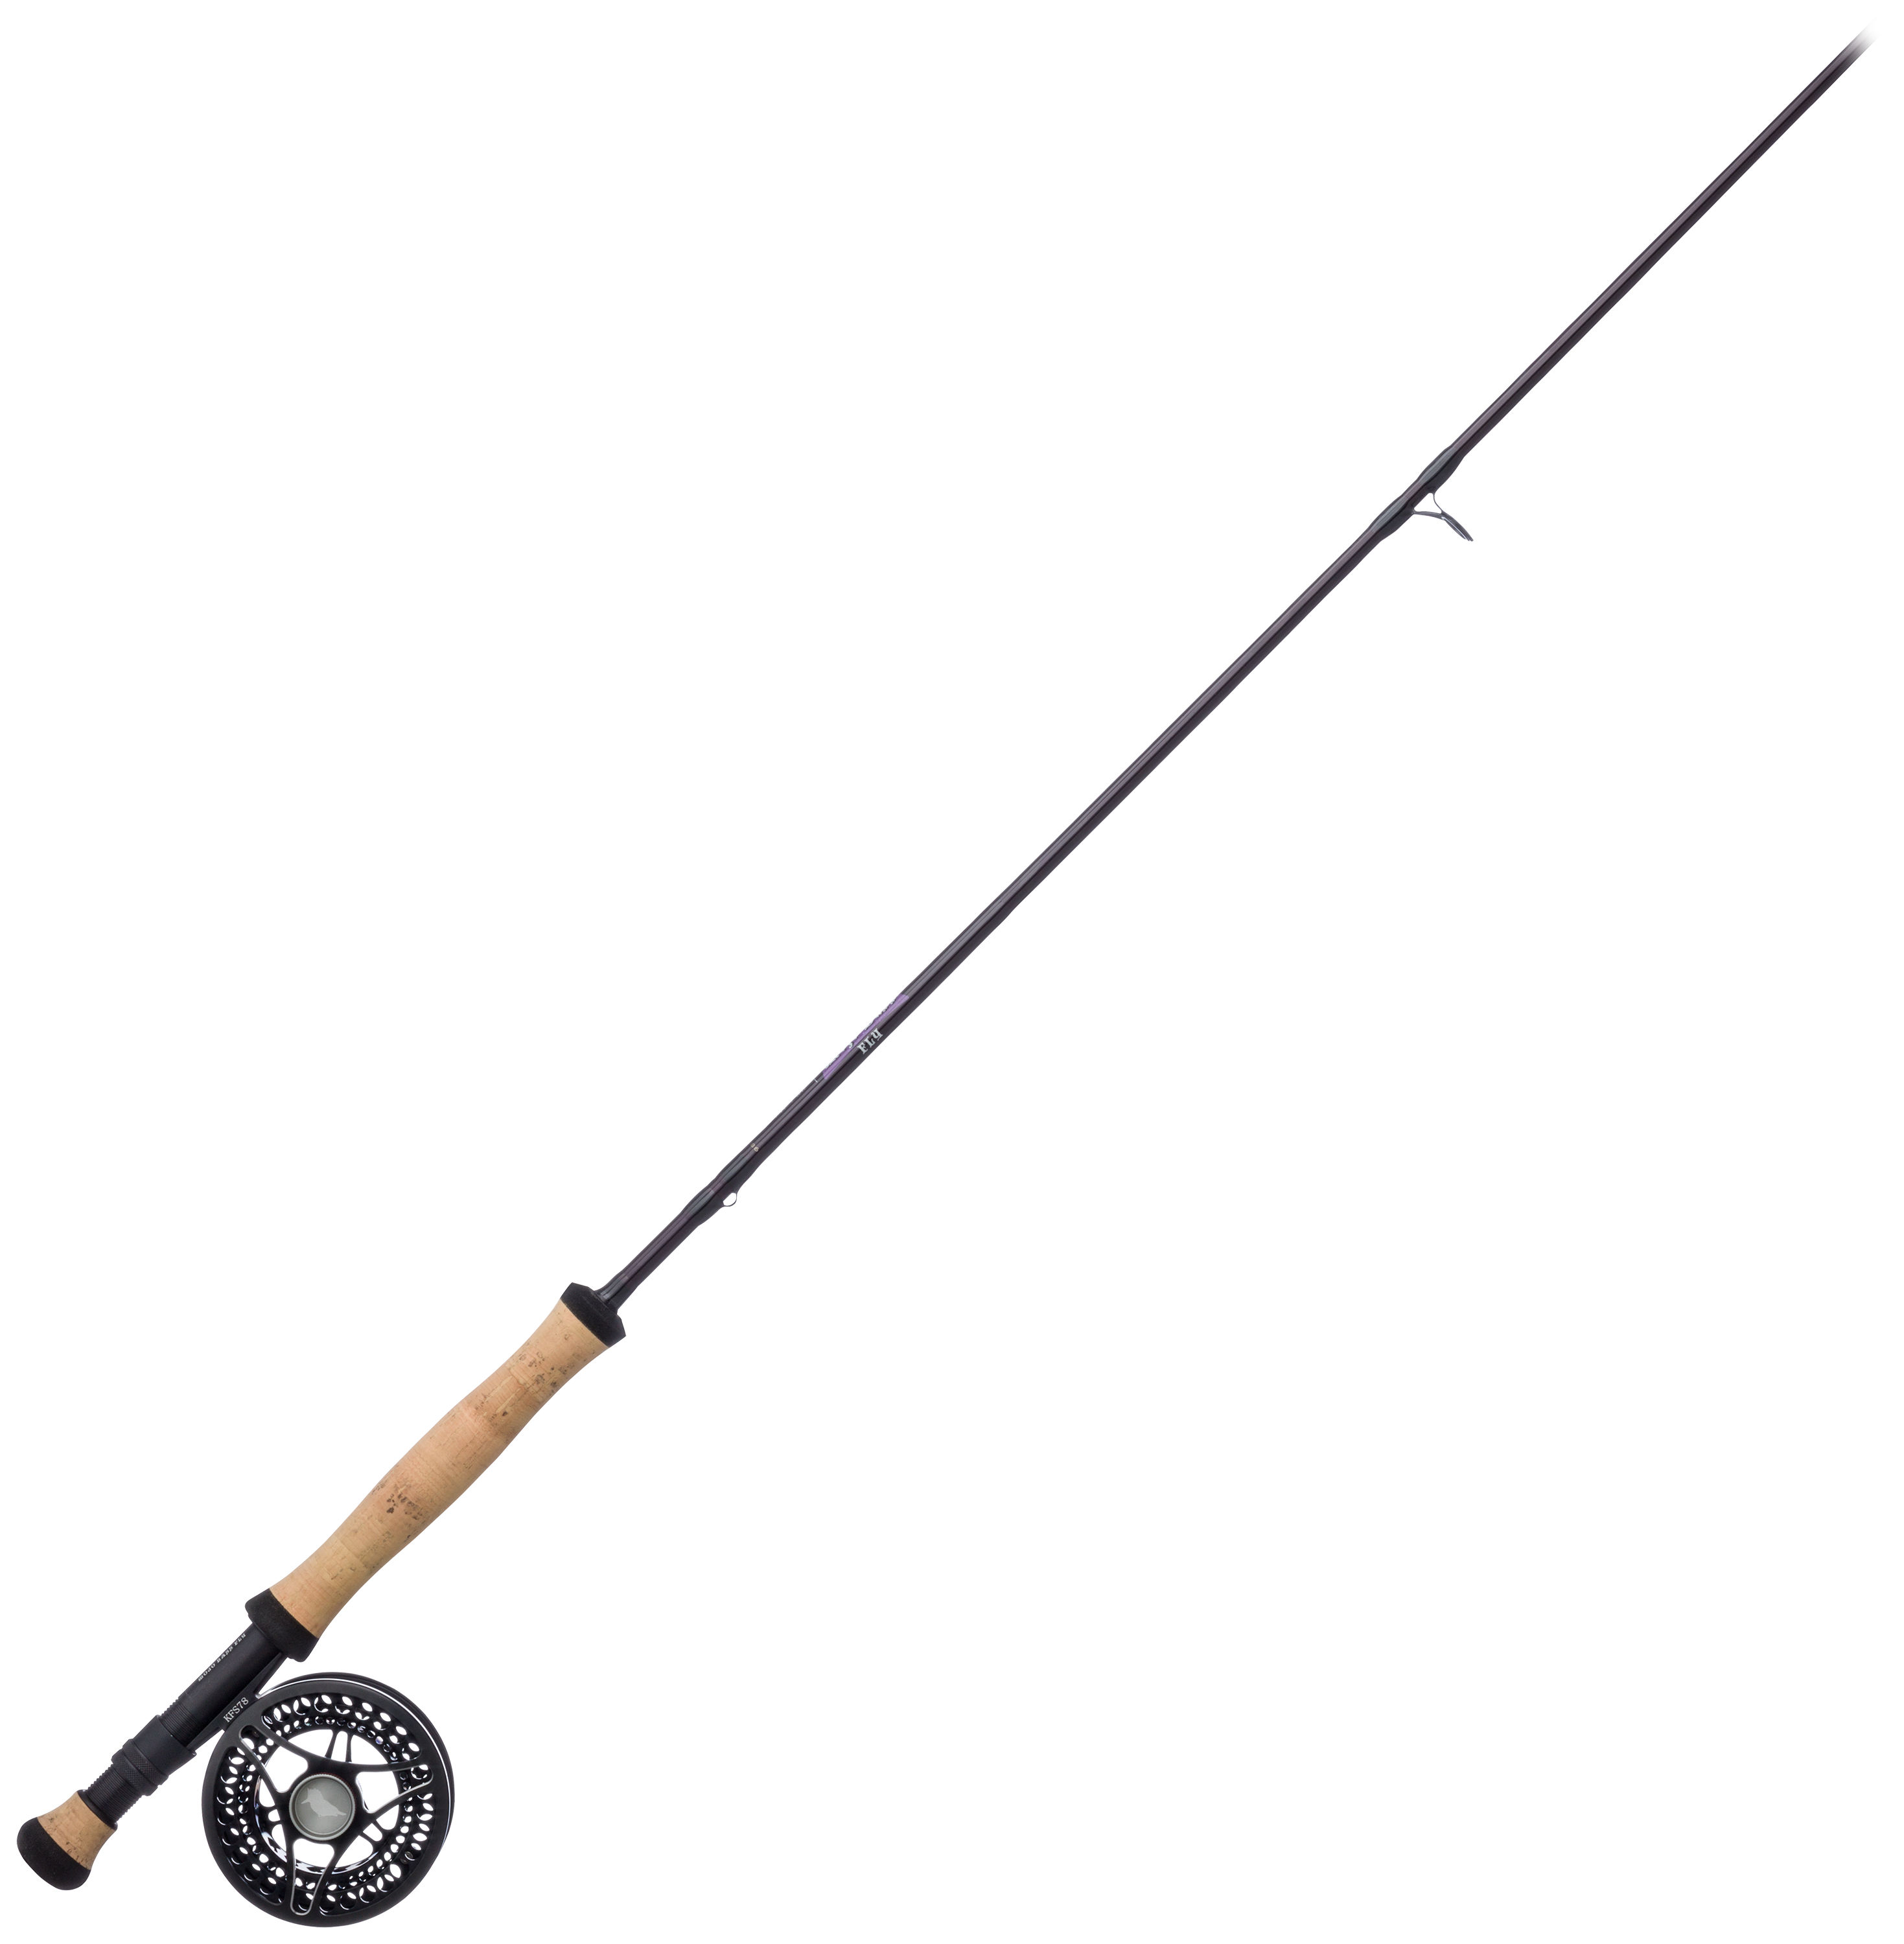 River Fly Shop Kingfisher Reel/St. Croix Mojo Bass Fly Rod Outfit - KFT78/MBF7117.2